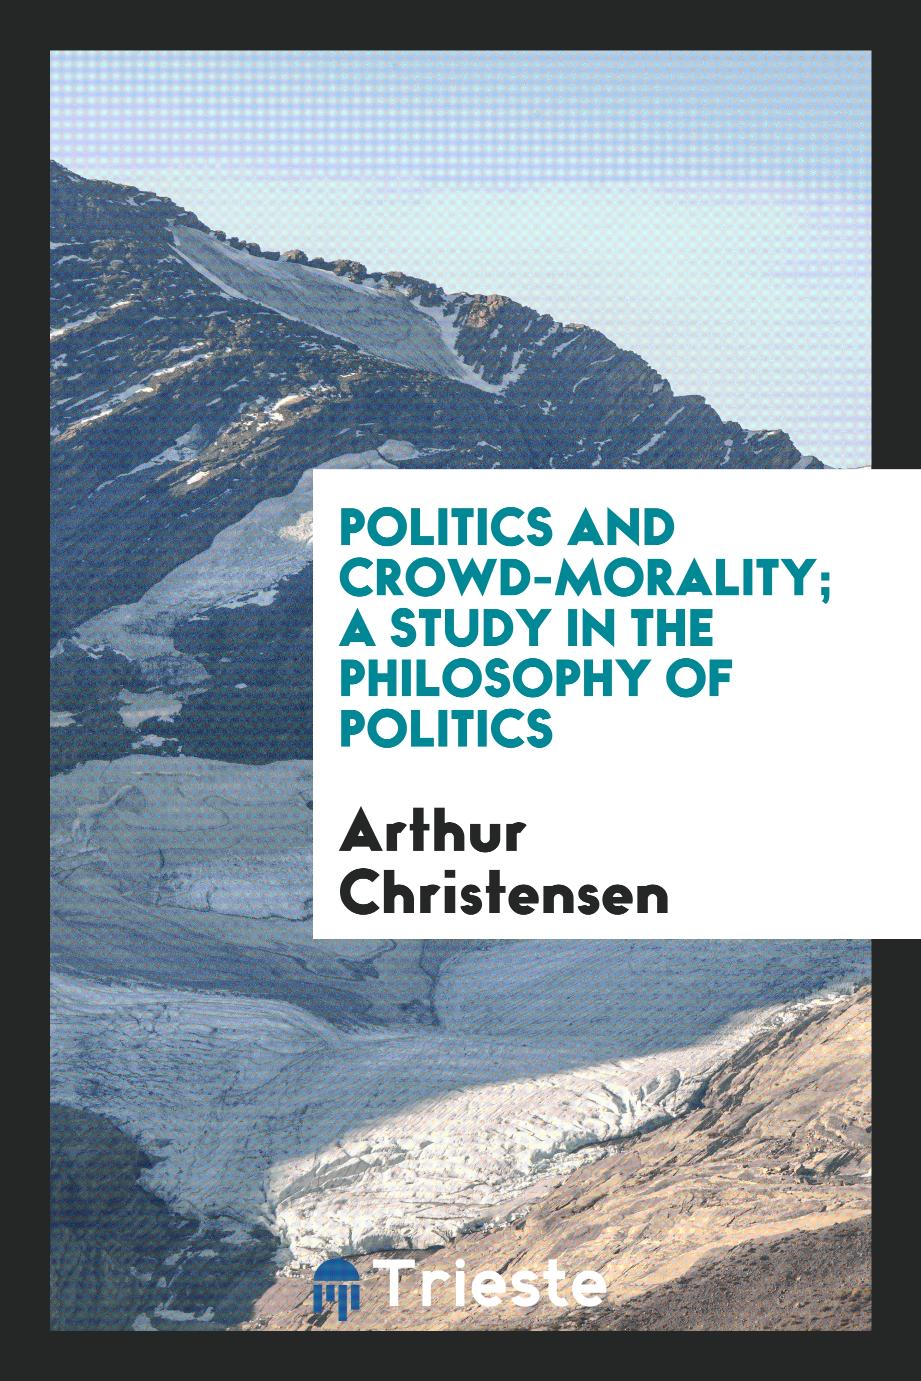 politics and crowd-morality; a study in the philosophy of politics